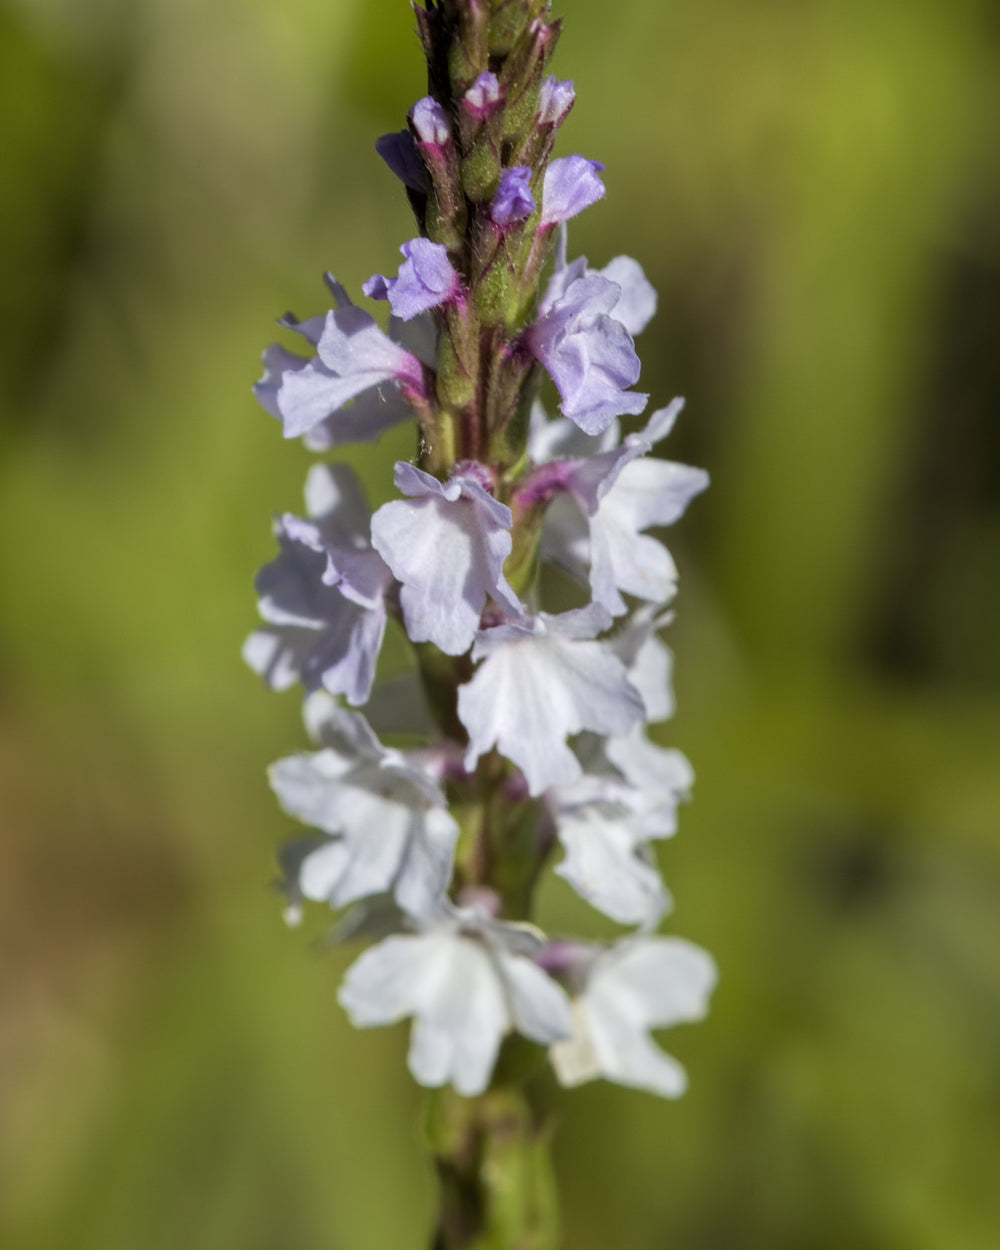 Narrow-leaved Vervain